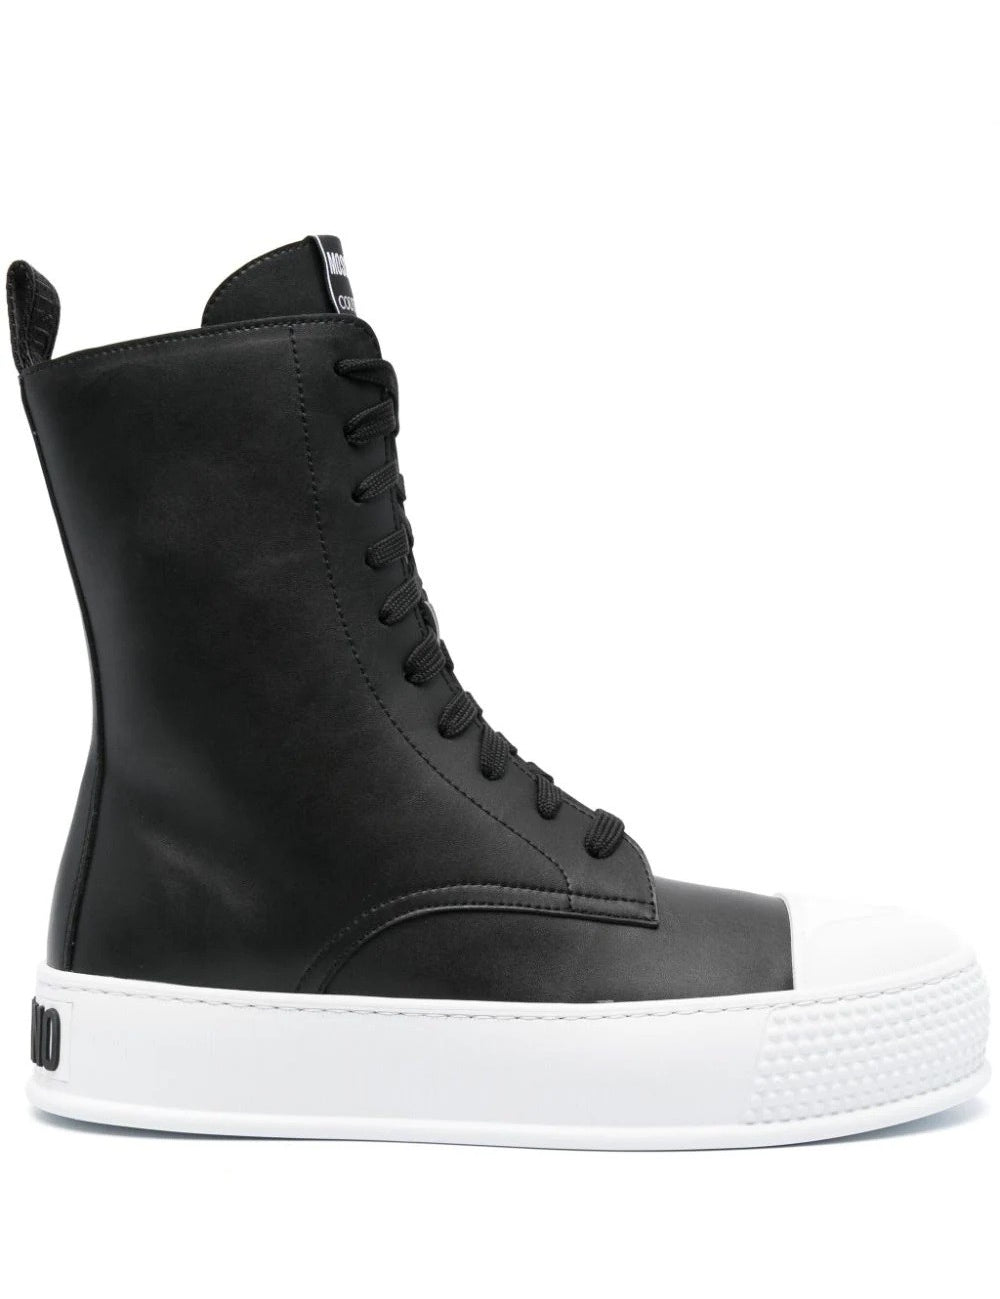 sneakers_2a0d5720-0390-4bf7-8a71-802edcc05848.jpg